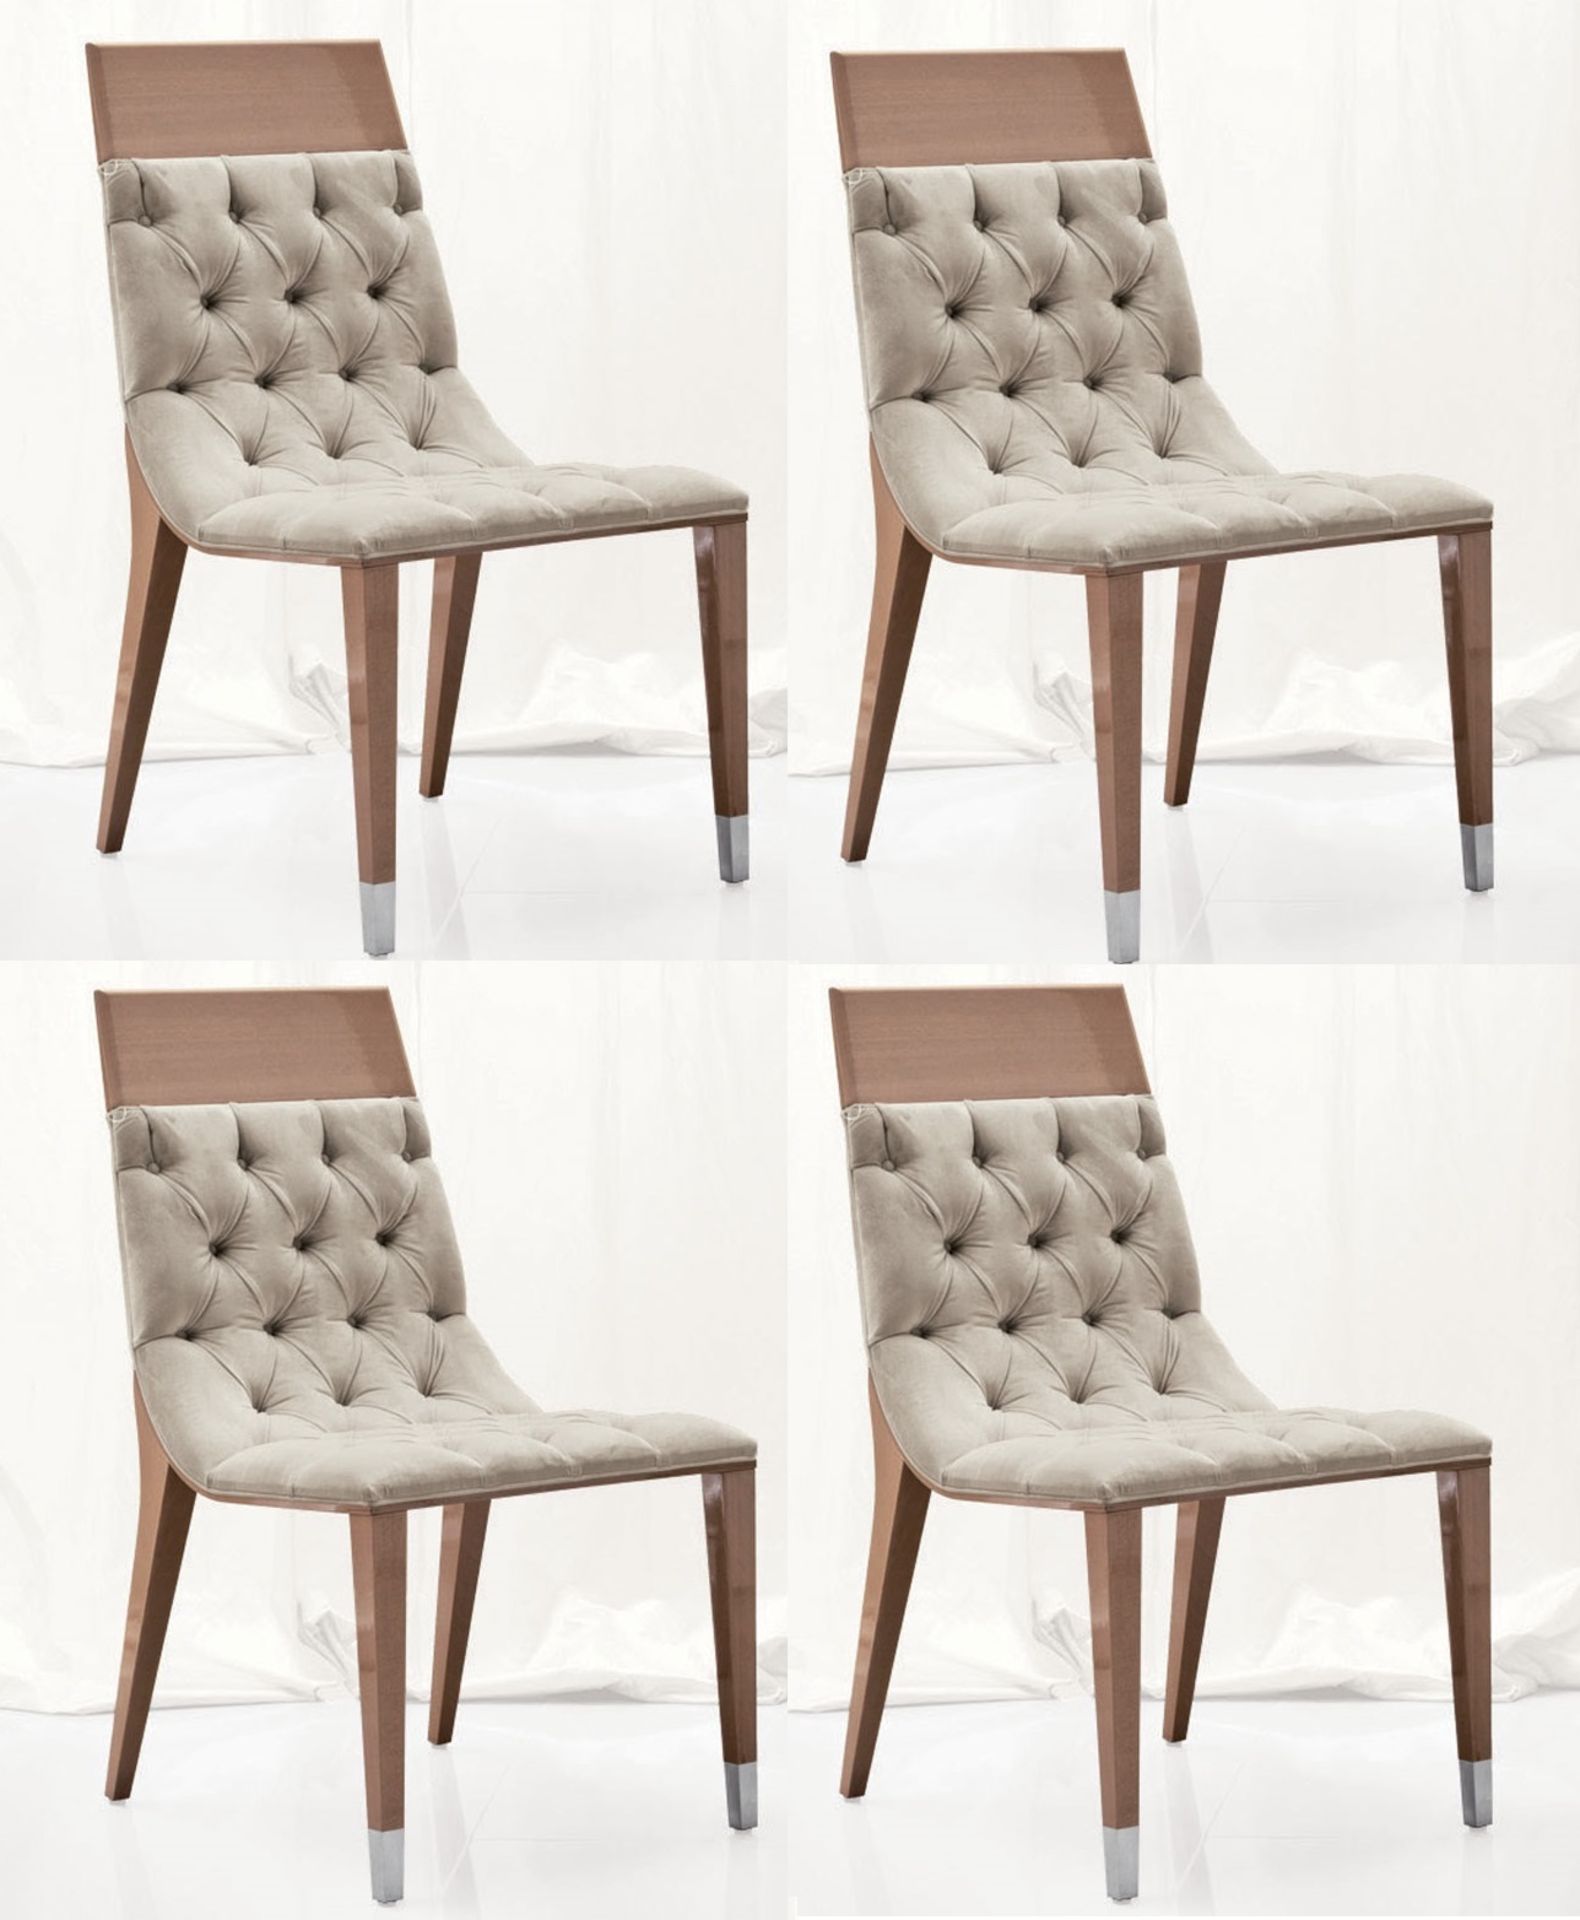 4 x GIORGIO COLLECTION 'Sunrise' Italian Designer Dining Chairs - Pre-owned In Good Condition